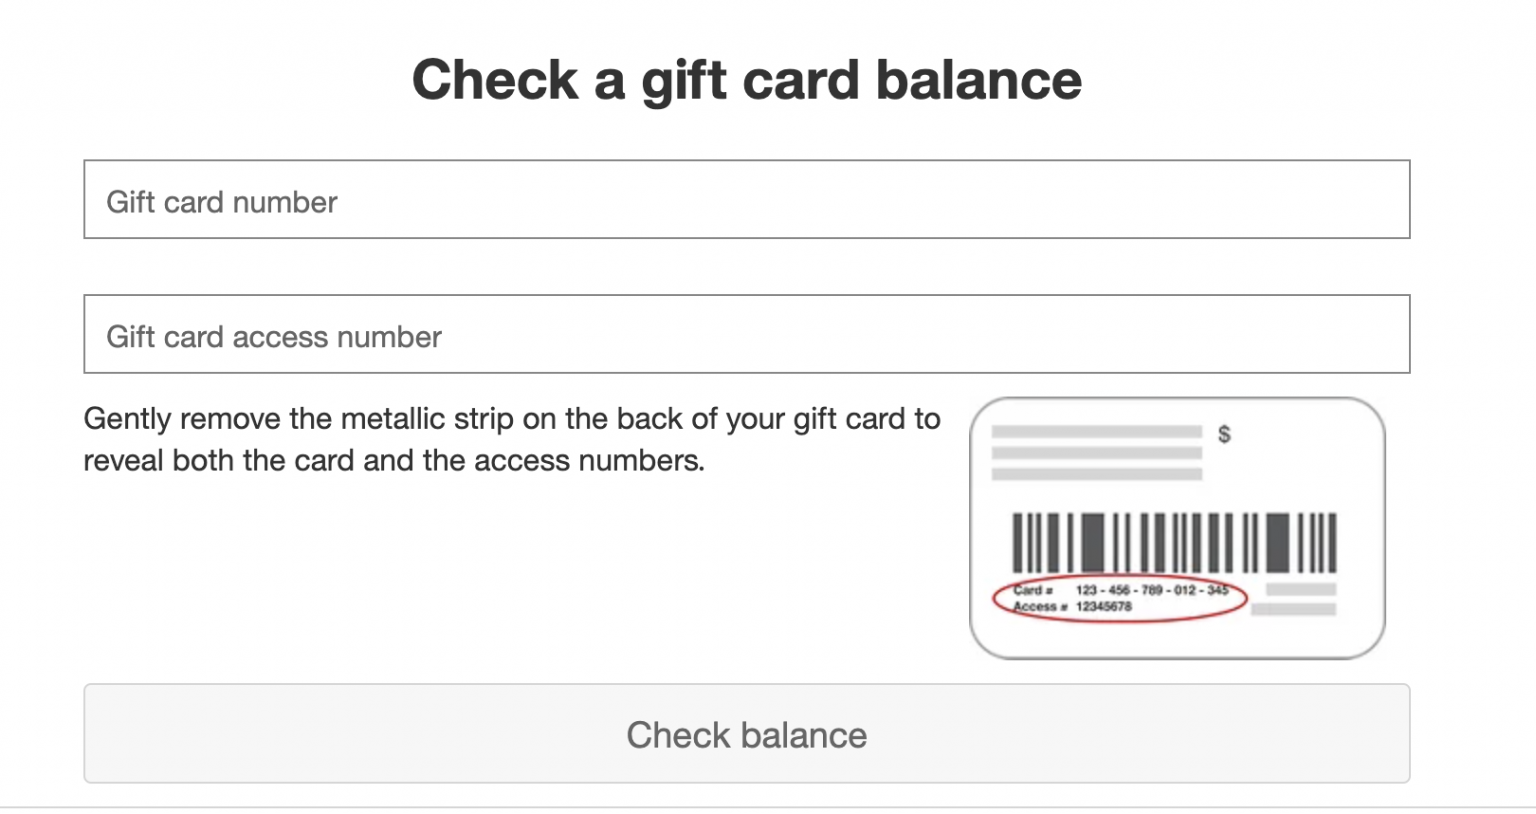 Enter your gift card number and access code